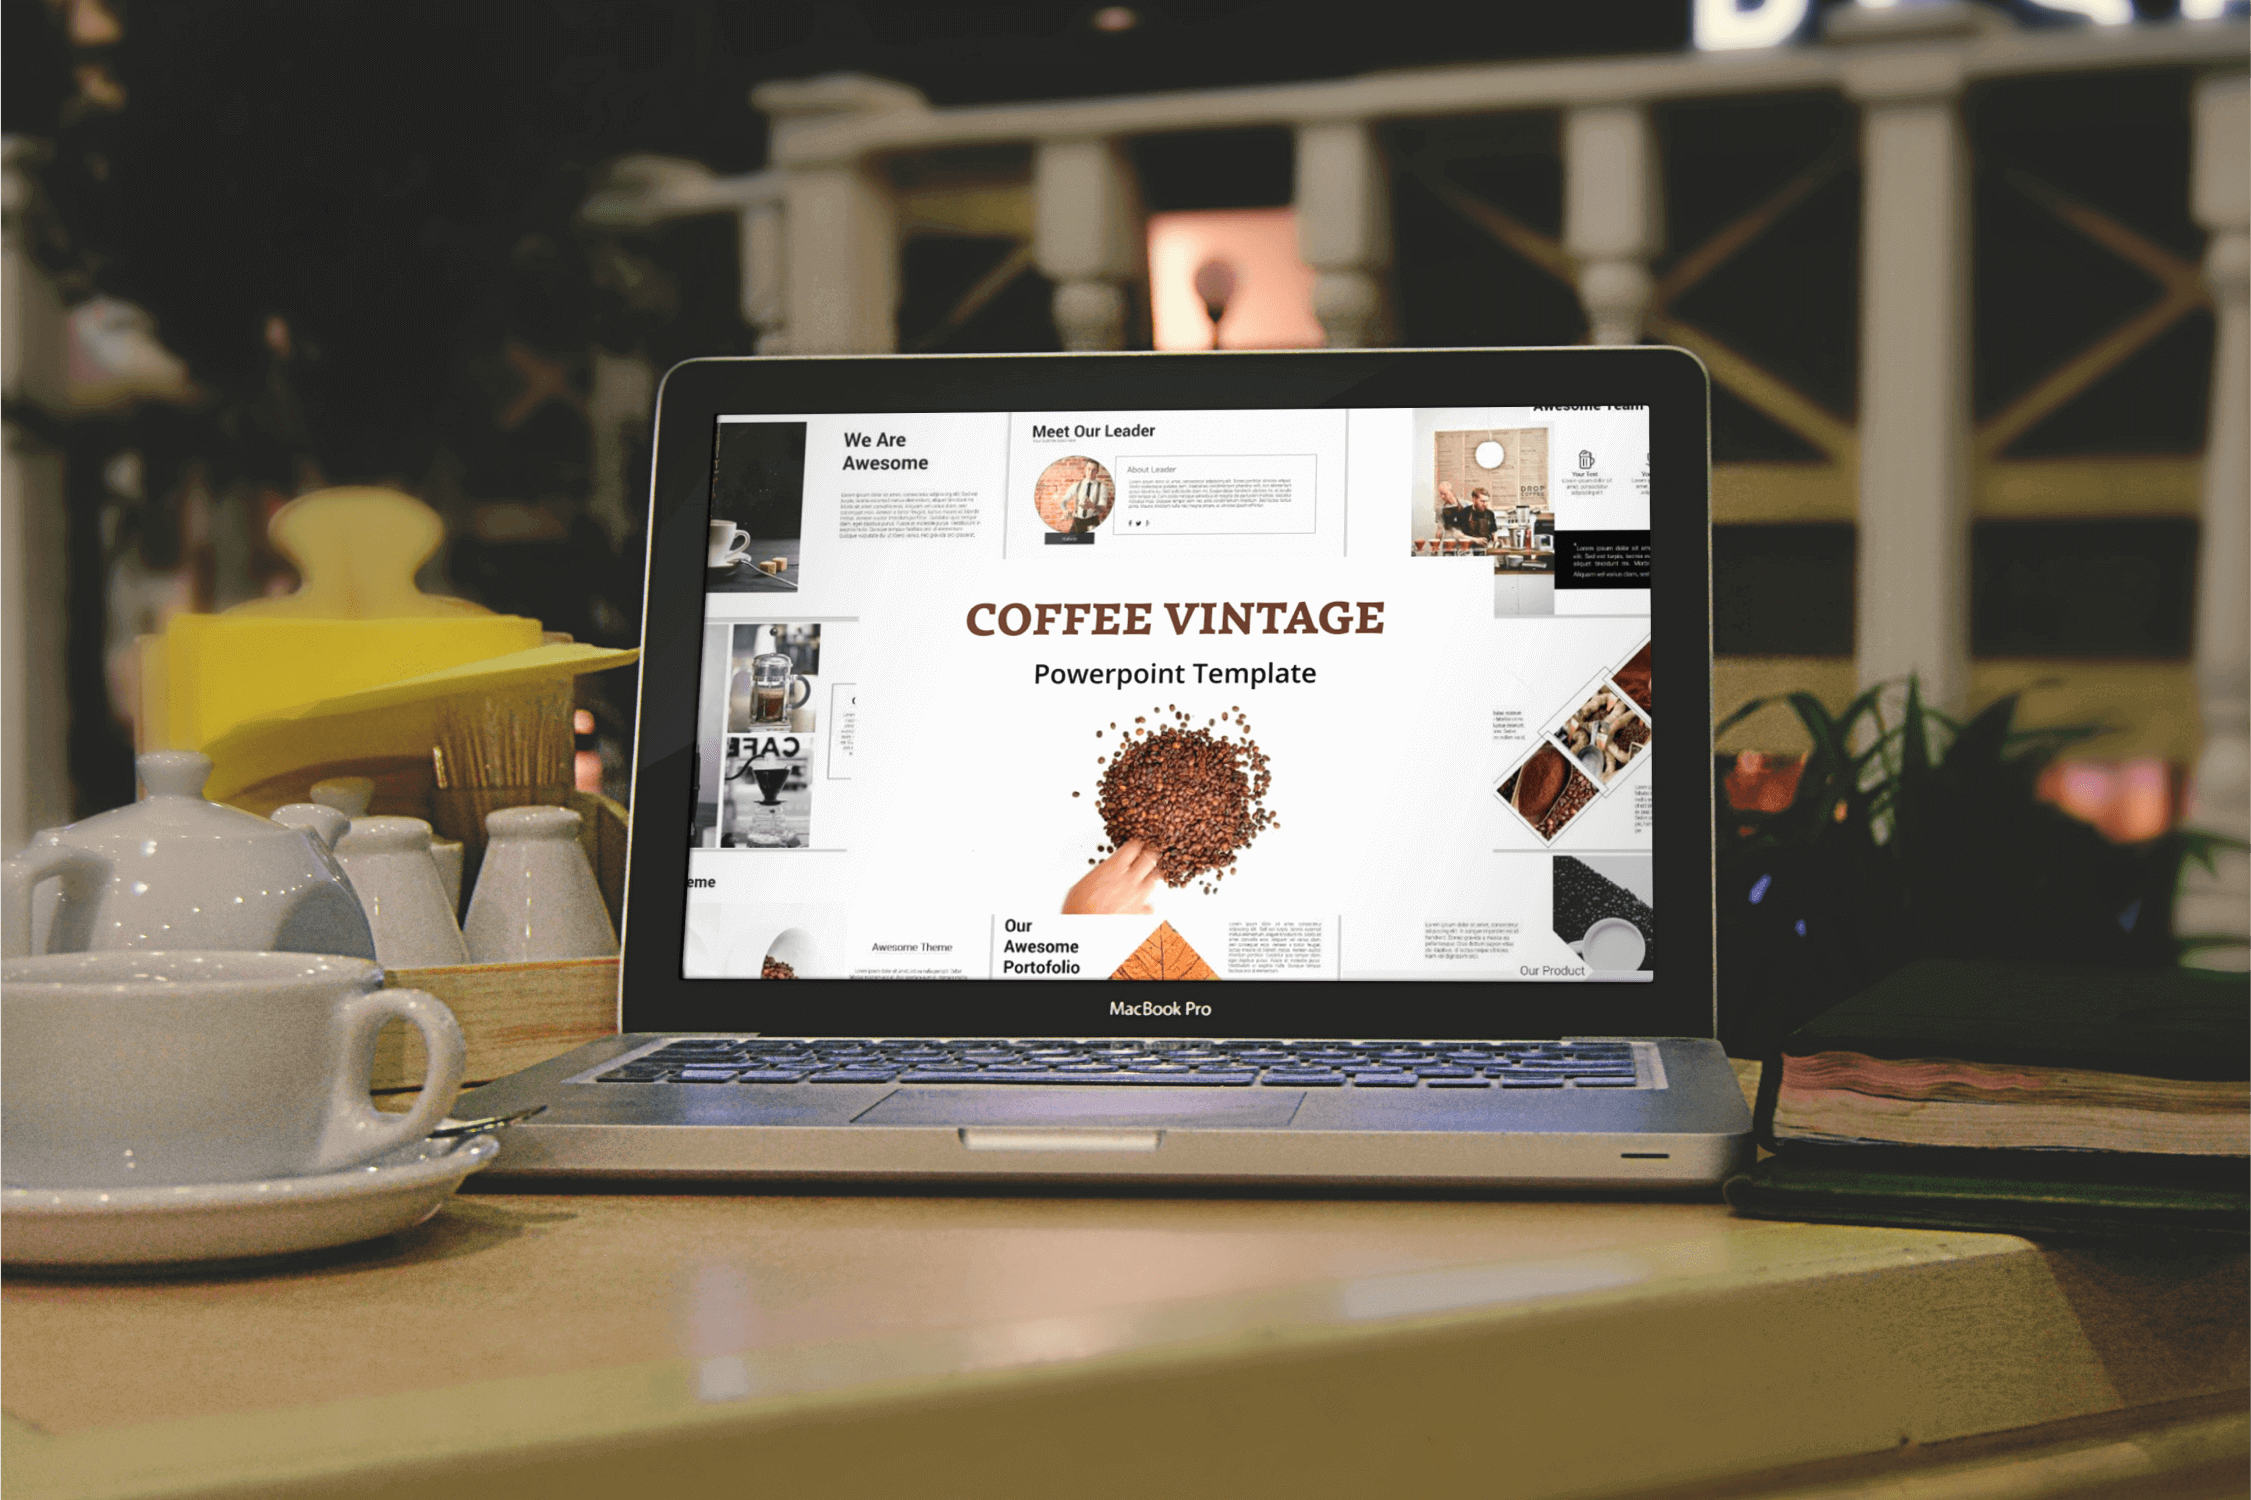 Preview Coffee Vintage Powerpoint Template on Notebook.